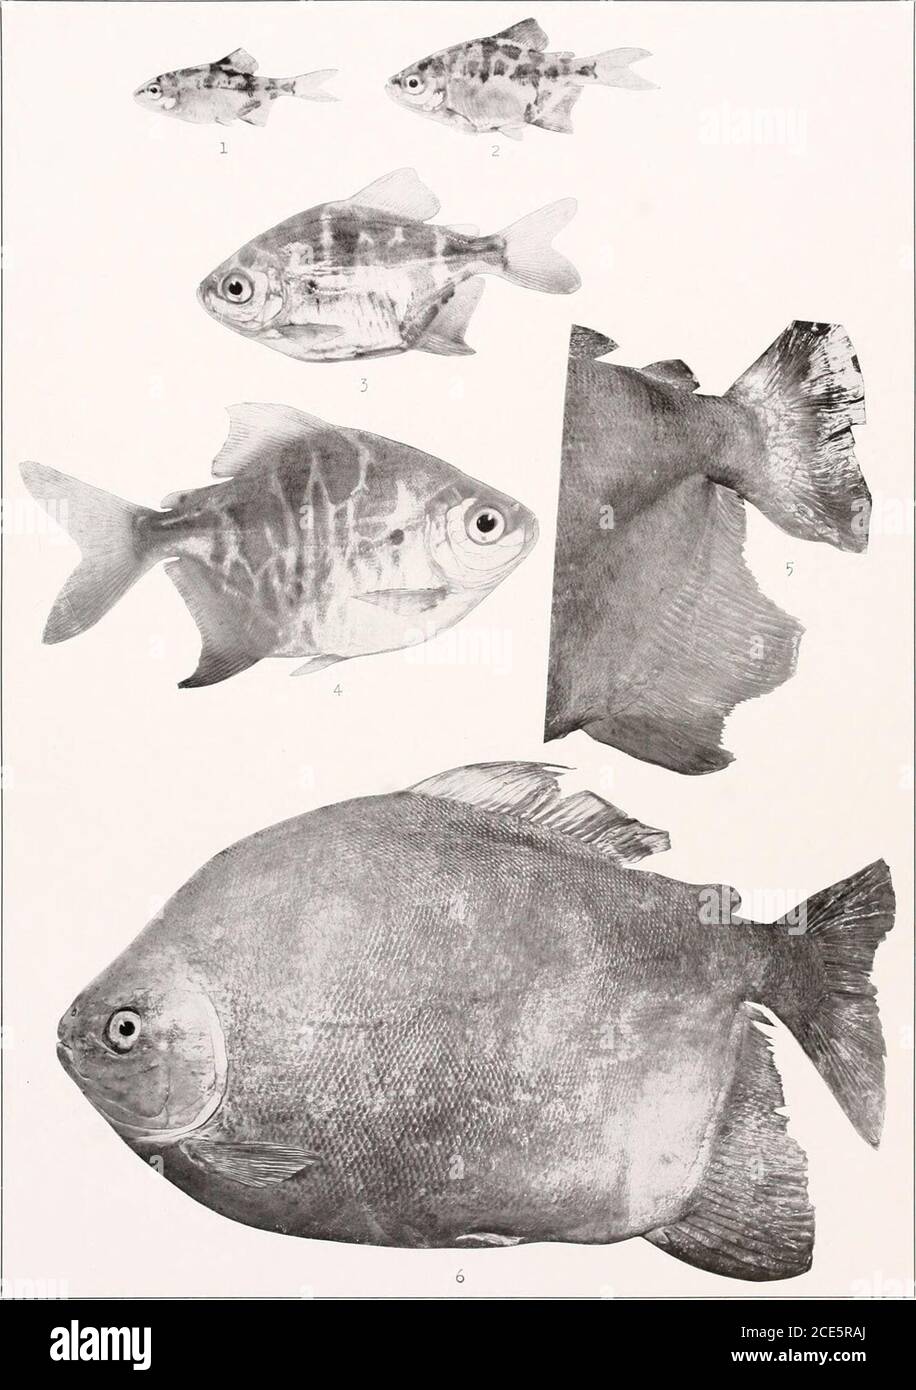 . The freshwater fishes of British Guiana, including a study of the ecological grouping of species and the relation of the fauna of the plateau to that of the lowlands . Myloplus rhomboidalis (Cttvier). 1.22 mm. No. 2219a. 2.31.5 mm. No. 22196. 3.40 mm. No. 2219c. 4. 219 mm. No. 1490. Memoirs Carnegie Museum, Vol. V. Plate LIX.. Myleus pacu (Schombxjrgk). 1. Young, 22 mm., No. 2220a. 2. Young, 27 mm., No. 22206. 3. Young, 5.5 mm.,No. 2220c. 4. Young. 55 mm., No. 2220d. 5. Tail of adult r/1; entire length, 535 mm., No. 2492. (i. Adult9, 515 mm., No. 2401. Memoirs Carnegie Museum, Vol. V. Plate Stock Photo